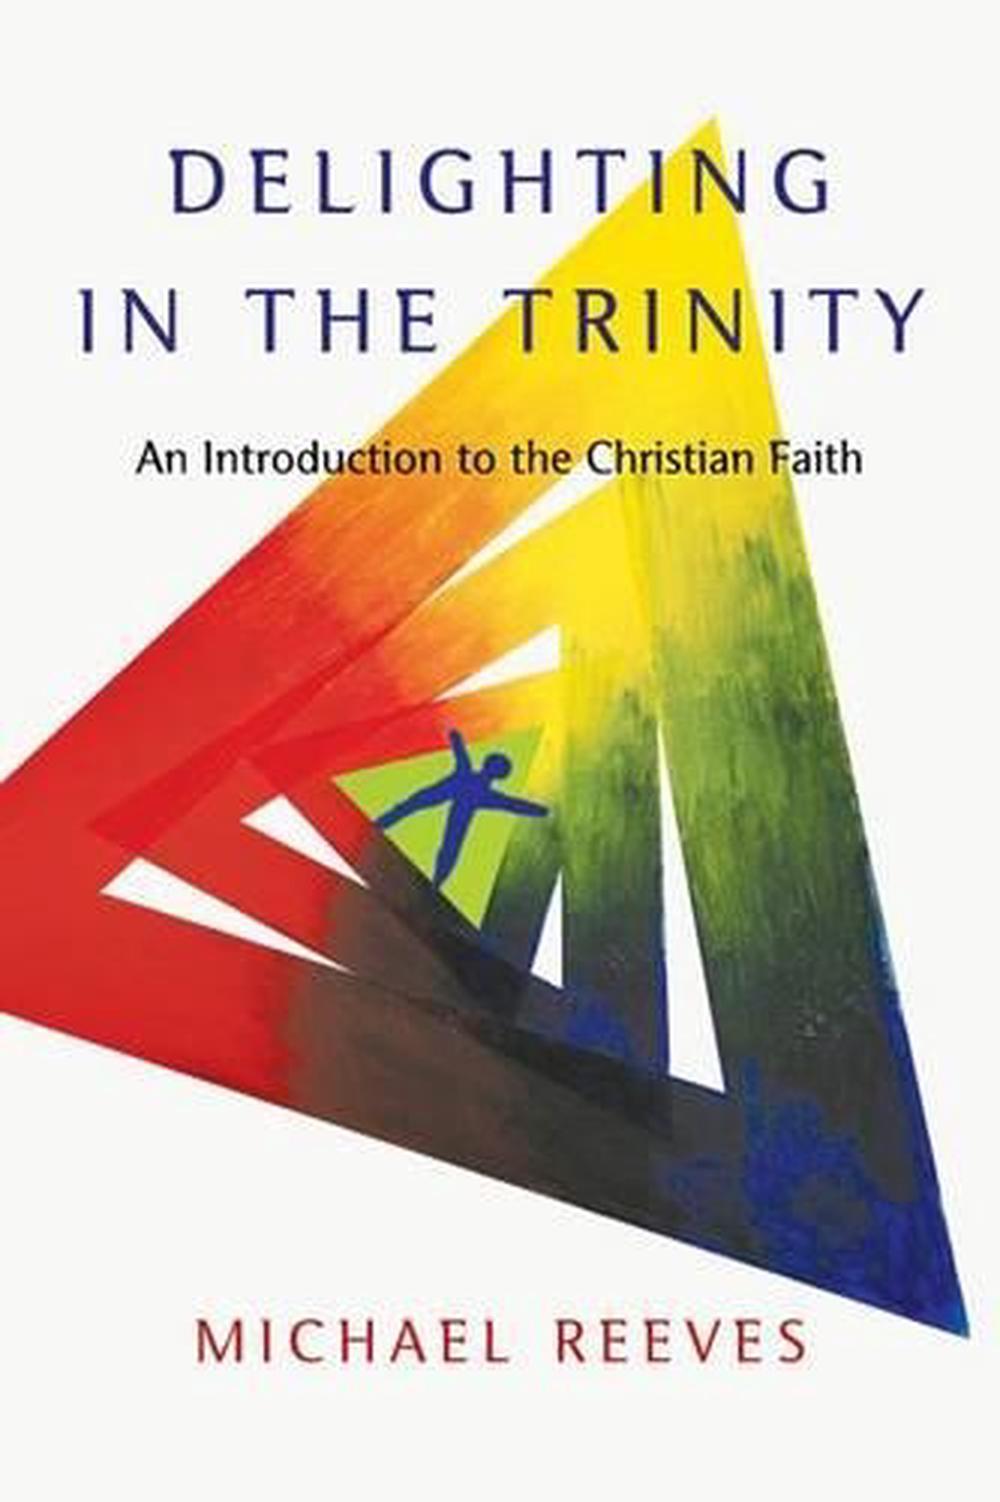 delighting in the trinity by michael reeves